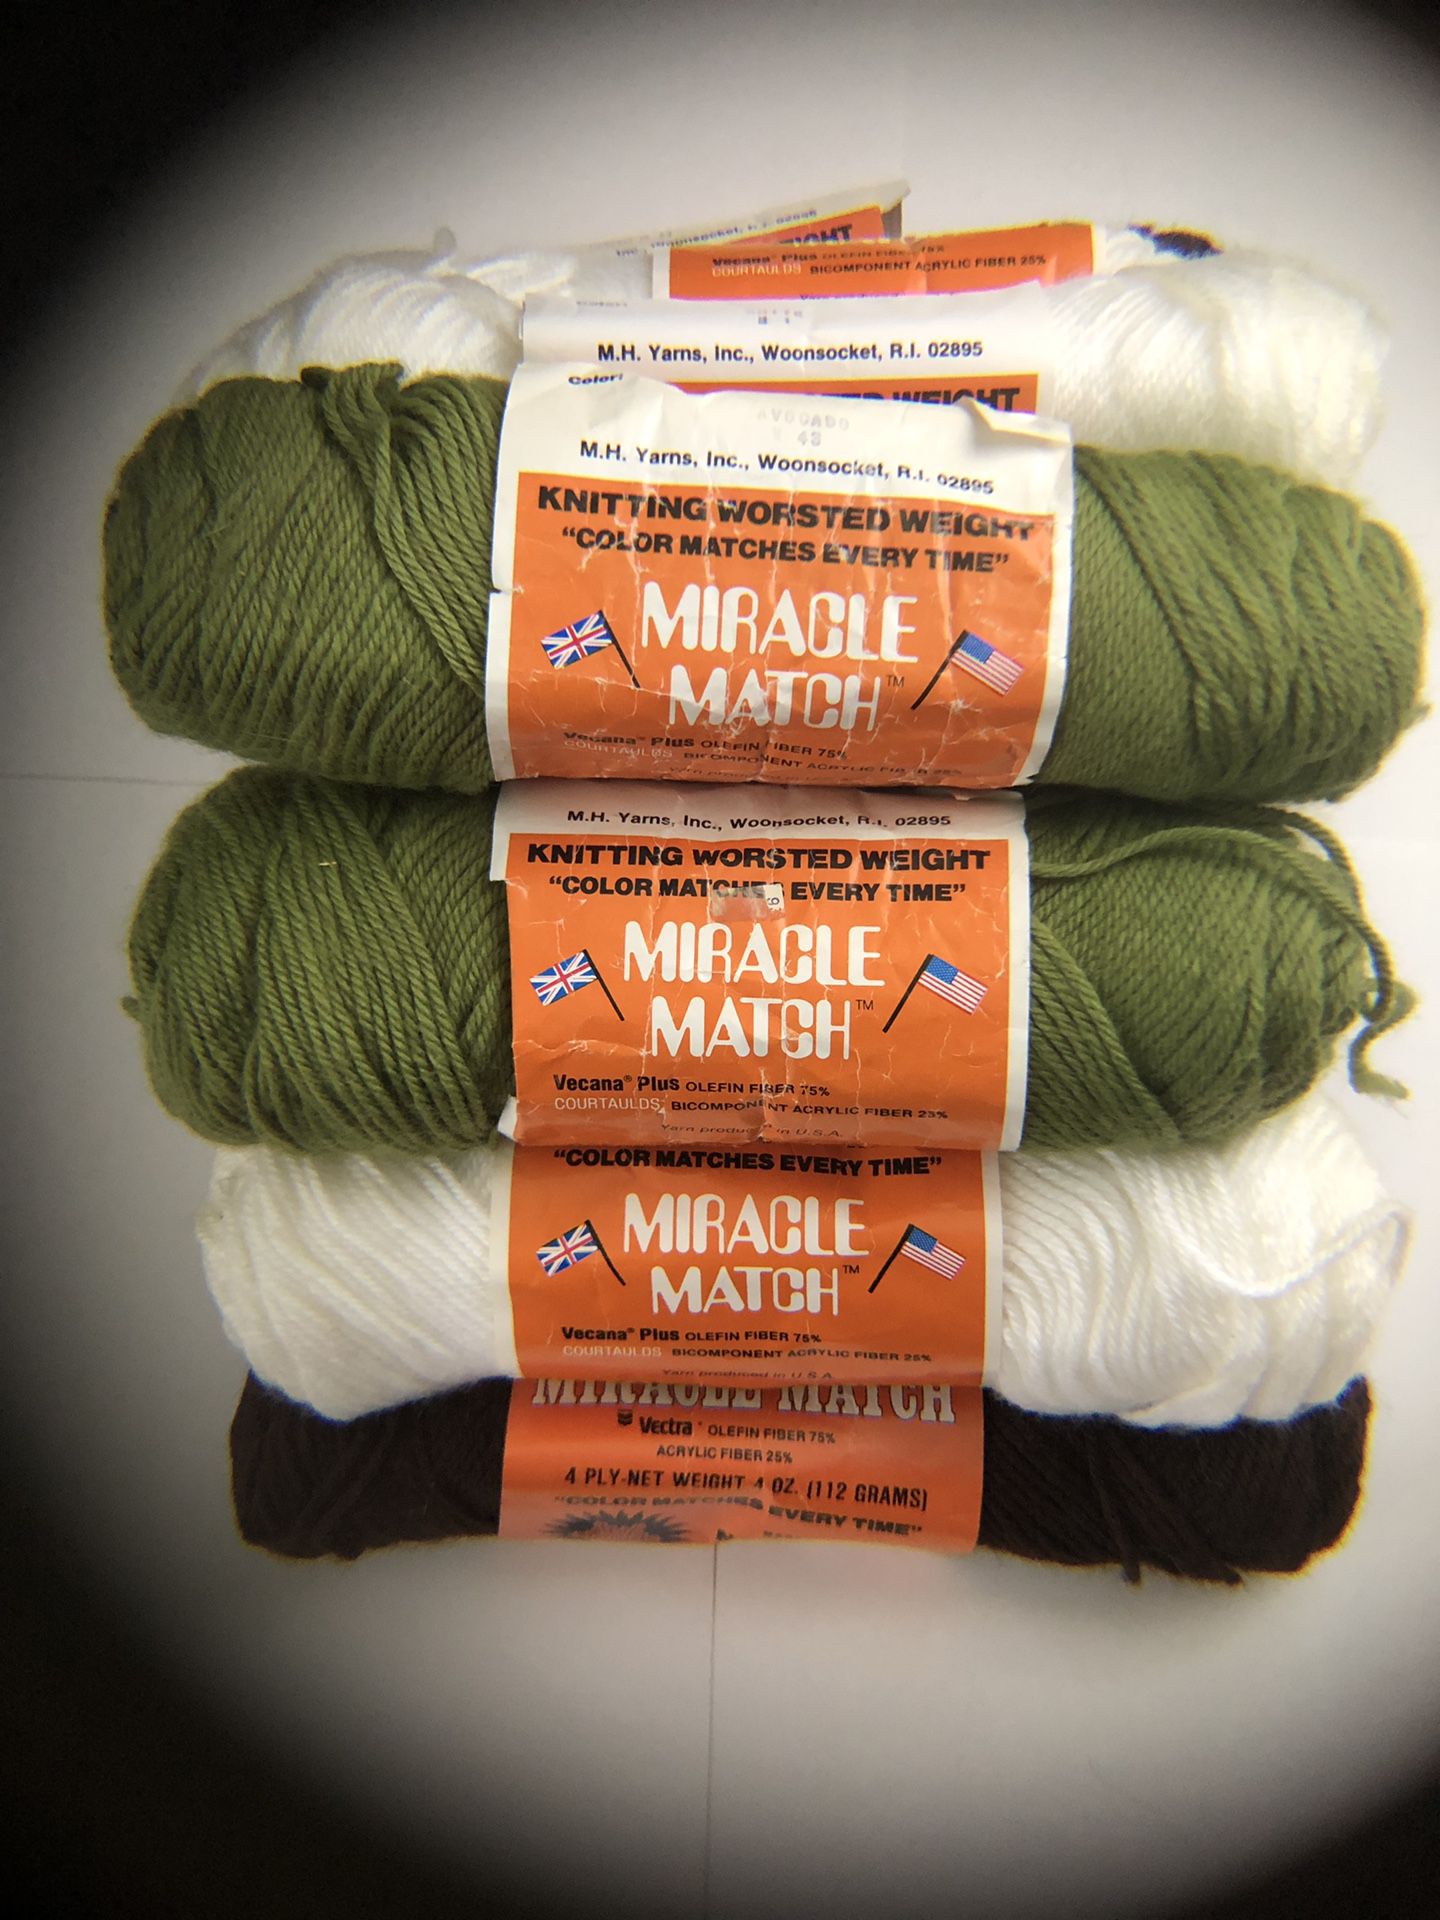 Lot of knitting worsted weight miracle match 4ply yarn. Vecana Plus Olefin Fiber 75% Bicomponent Acrylic Fiber 25%